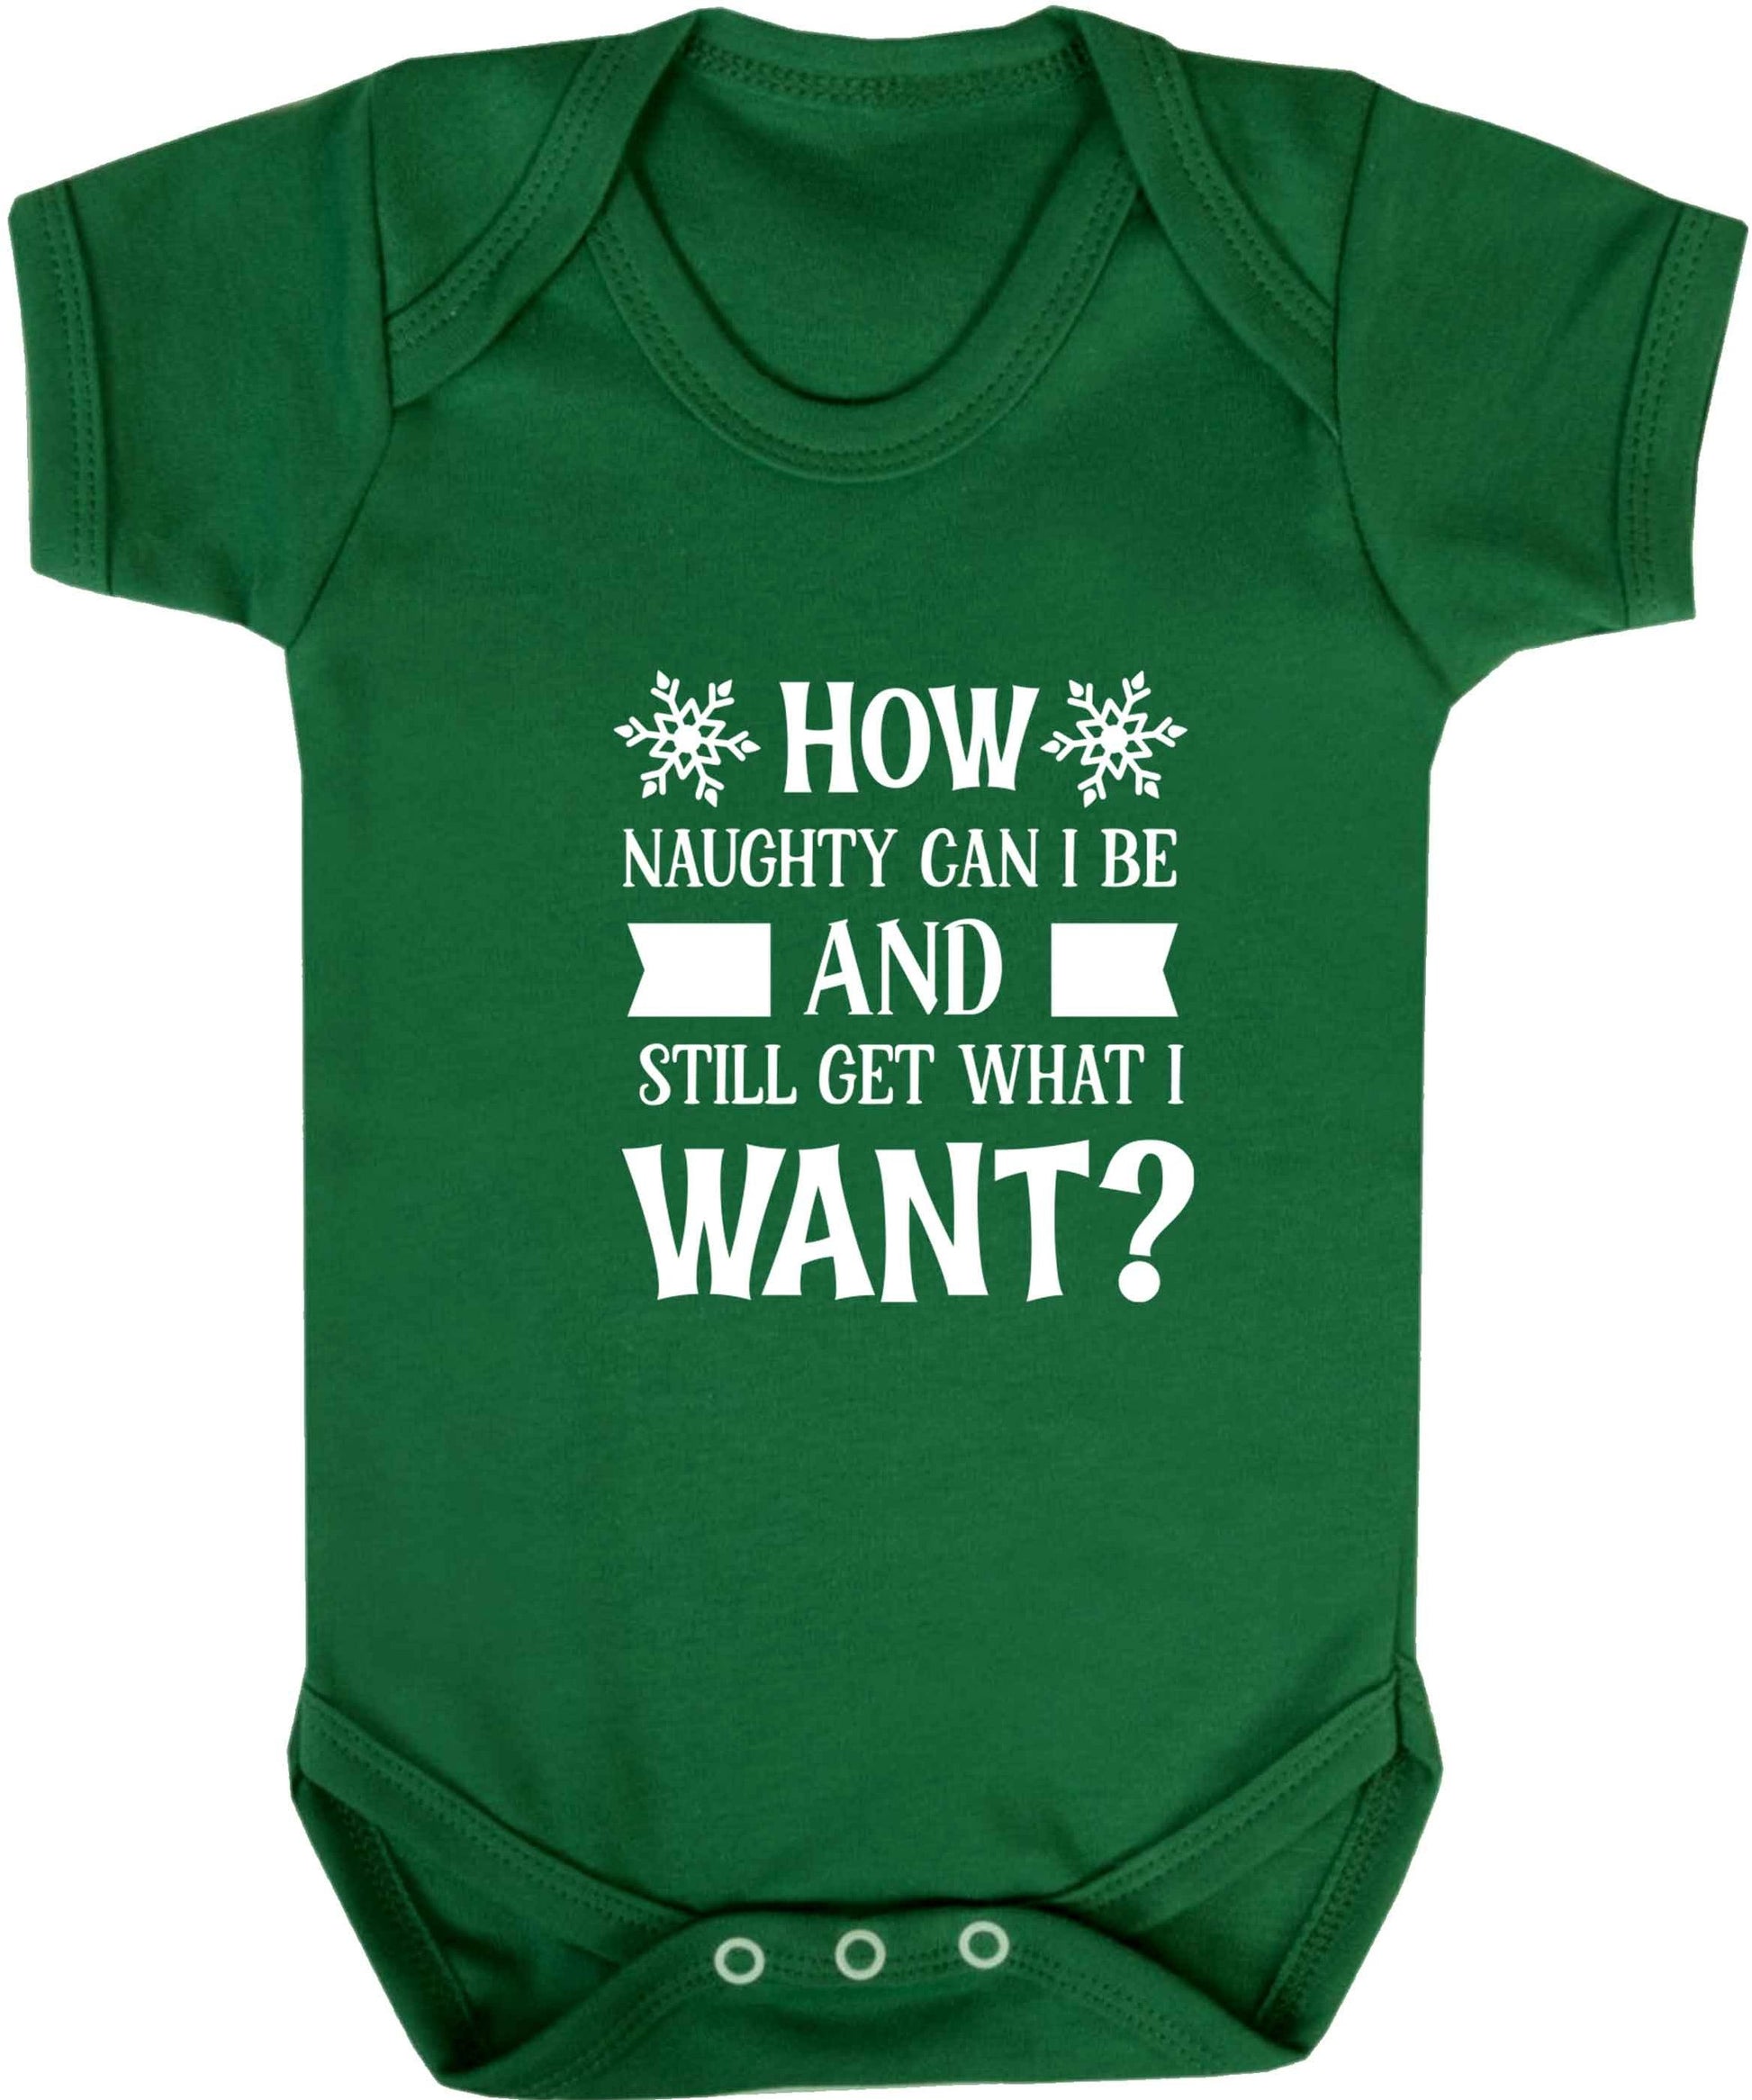 How naughty can I be and still get what I want? baby vest green 18-24 months